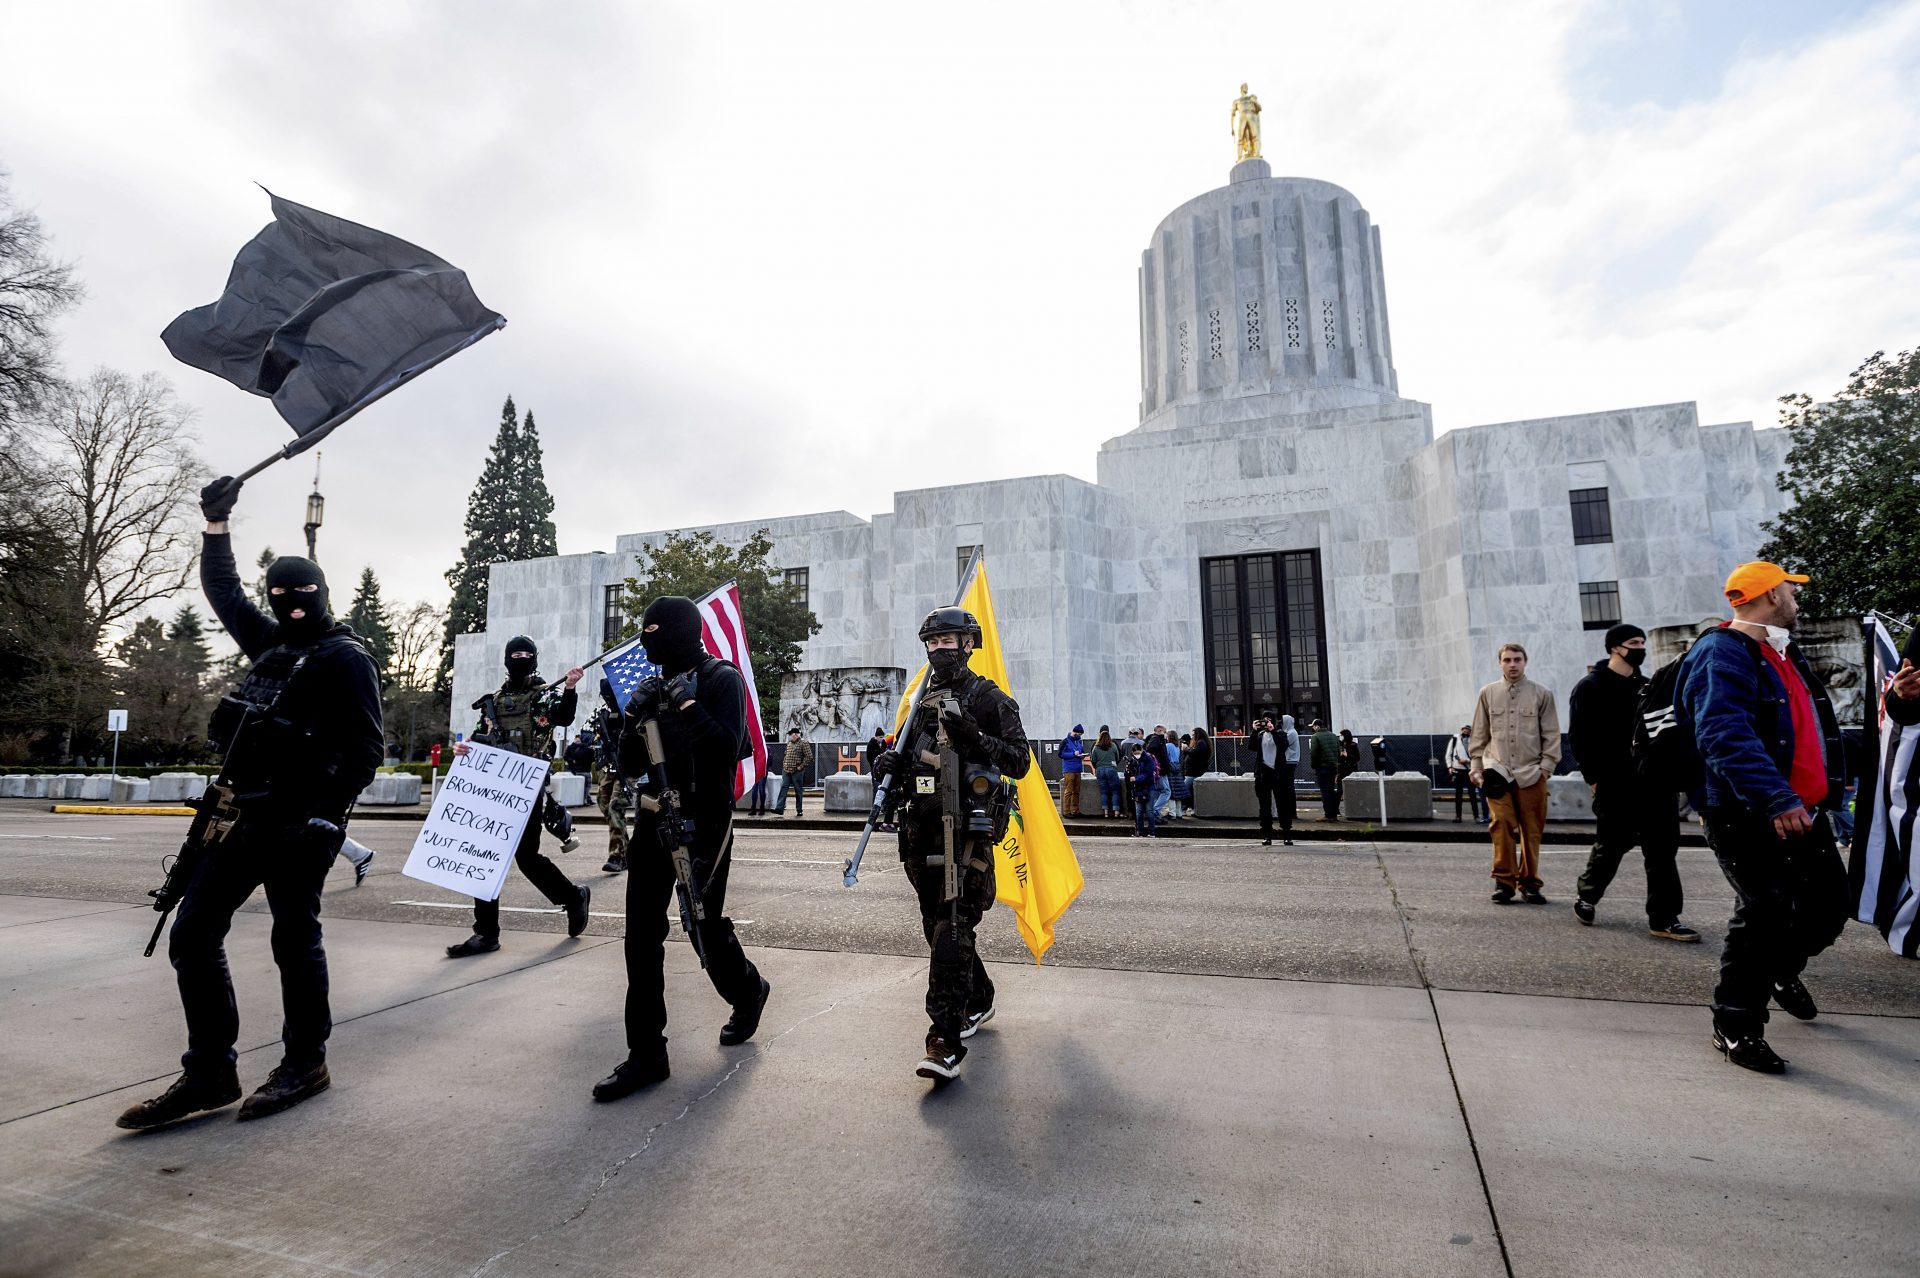 Protesters who identified themselves as Liberty Boys gather outside the Oregon State Capitol on Sunday, Jan. 17, 2021, in Salem, Ore. The group said they want reduced government and do not support President Donald Trump or President-elect Joe Biden.